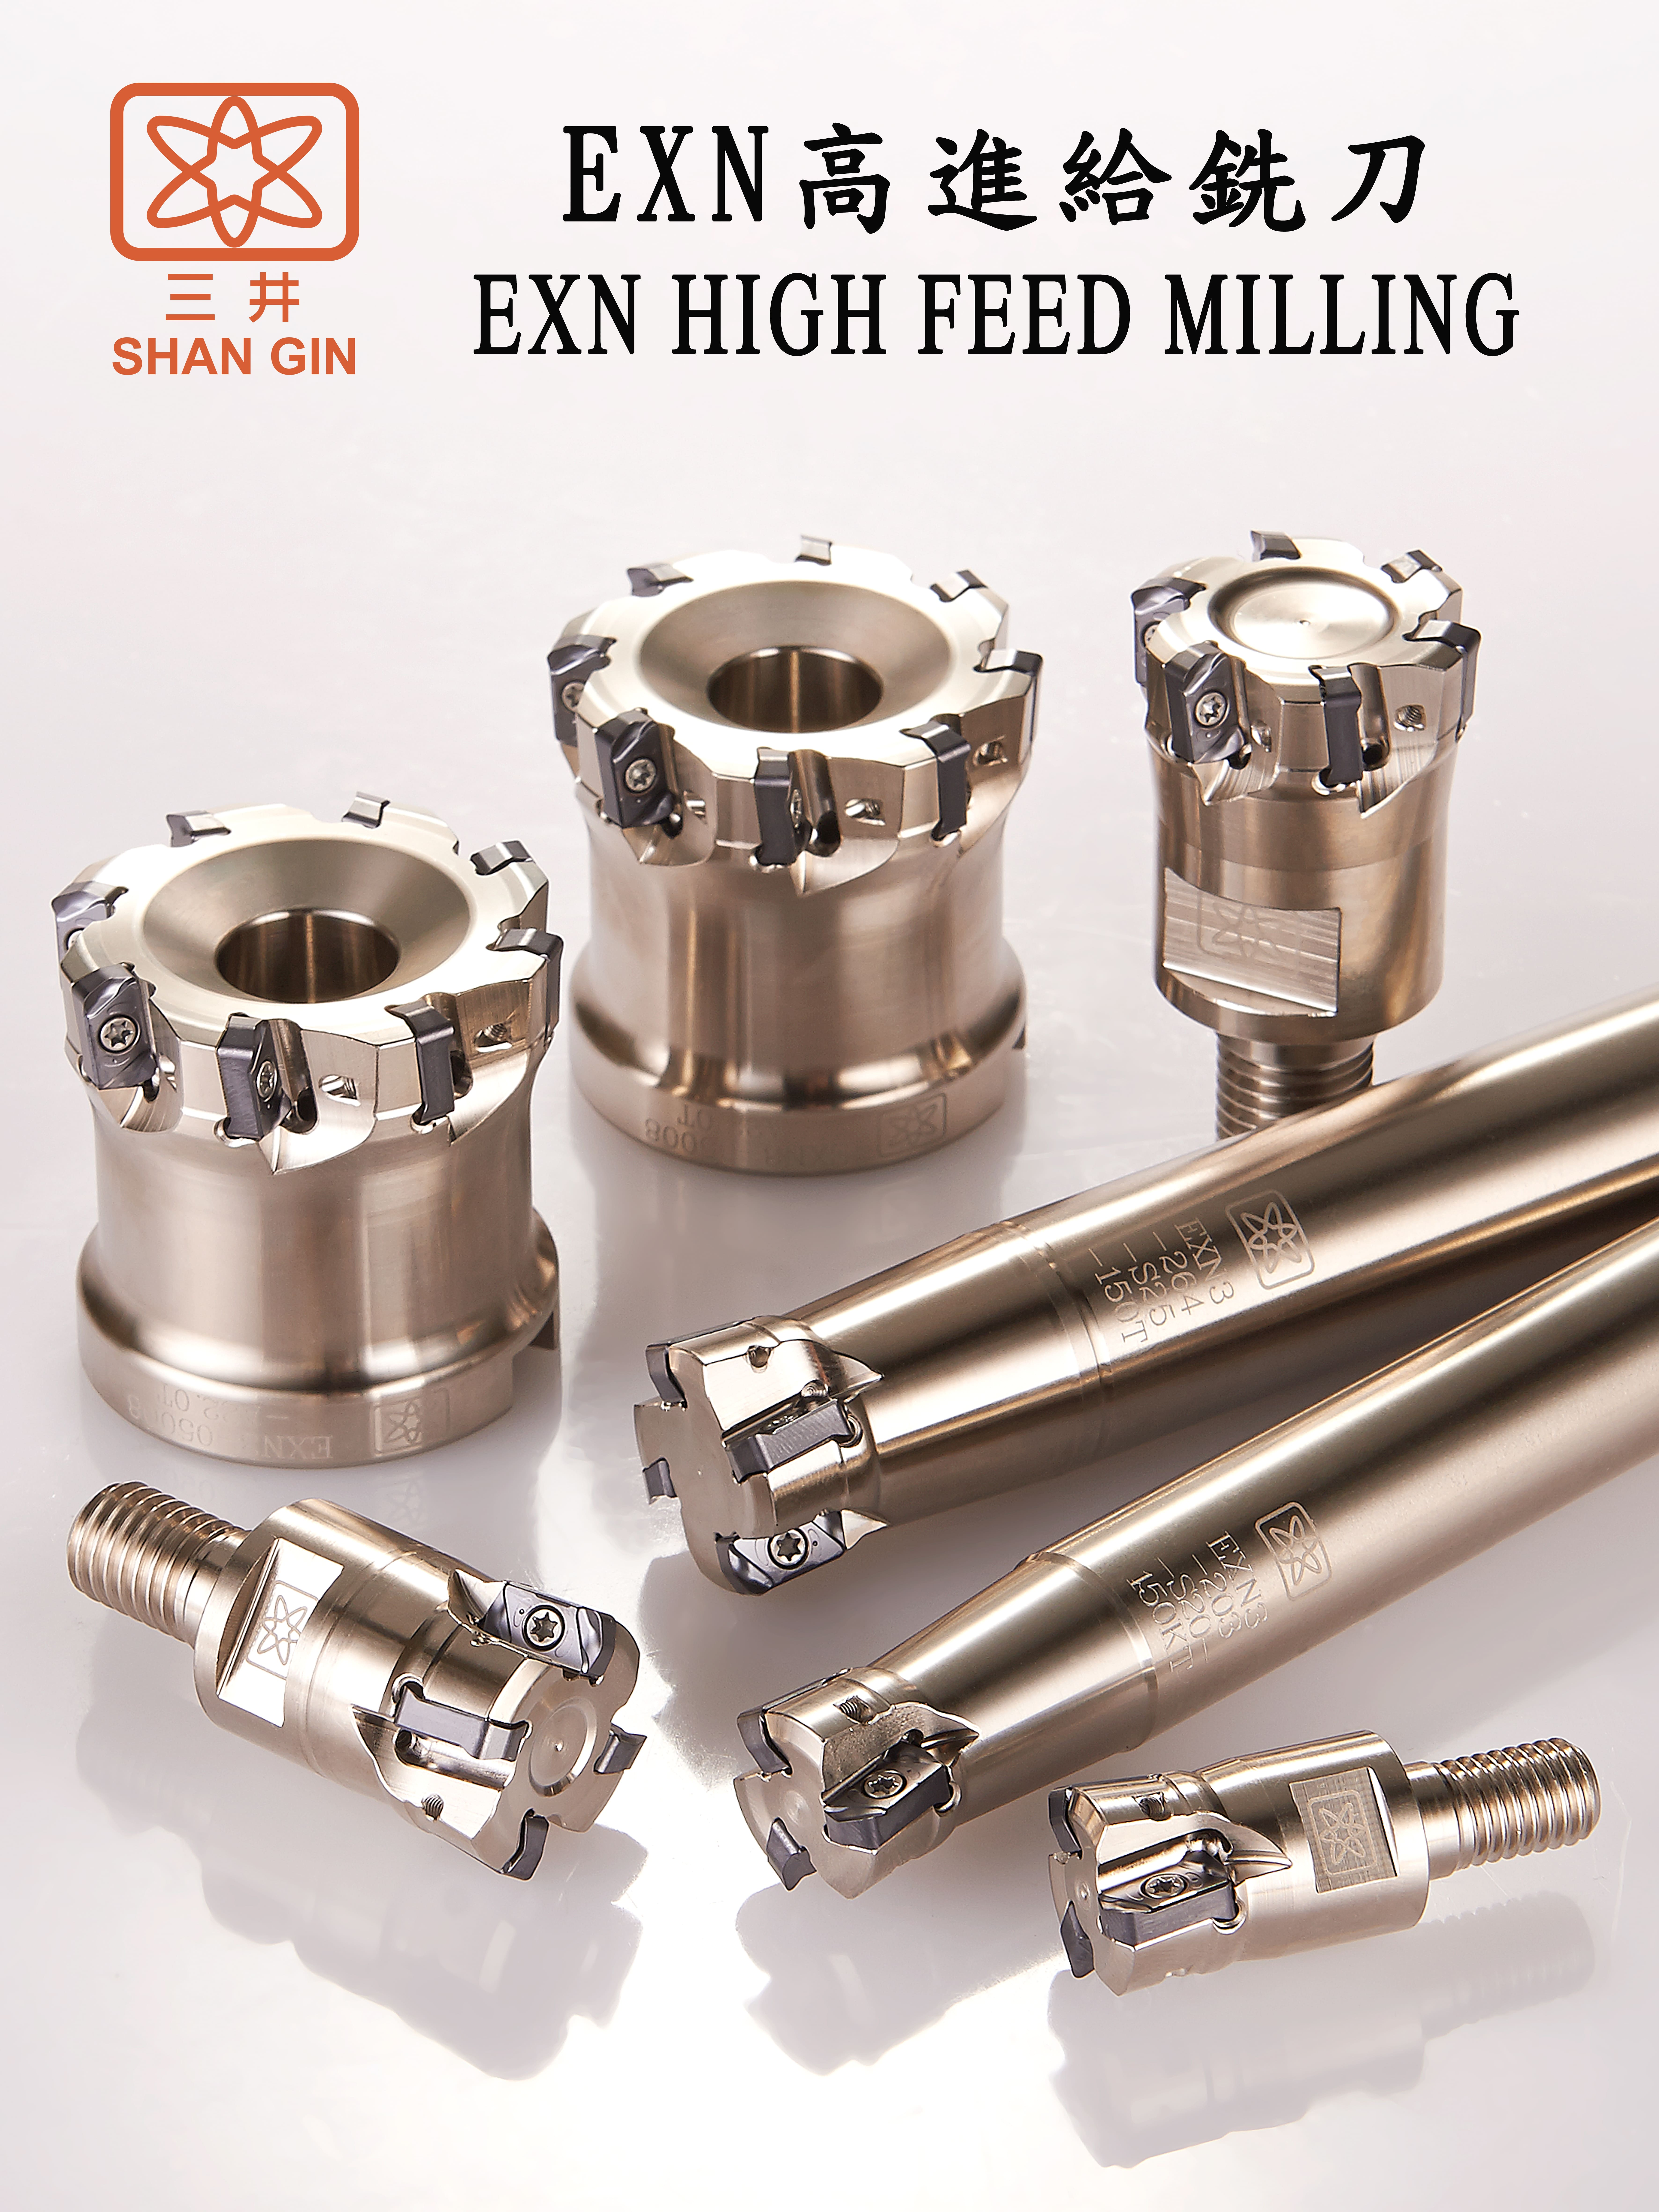 EXN HIGH FEED MILLING